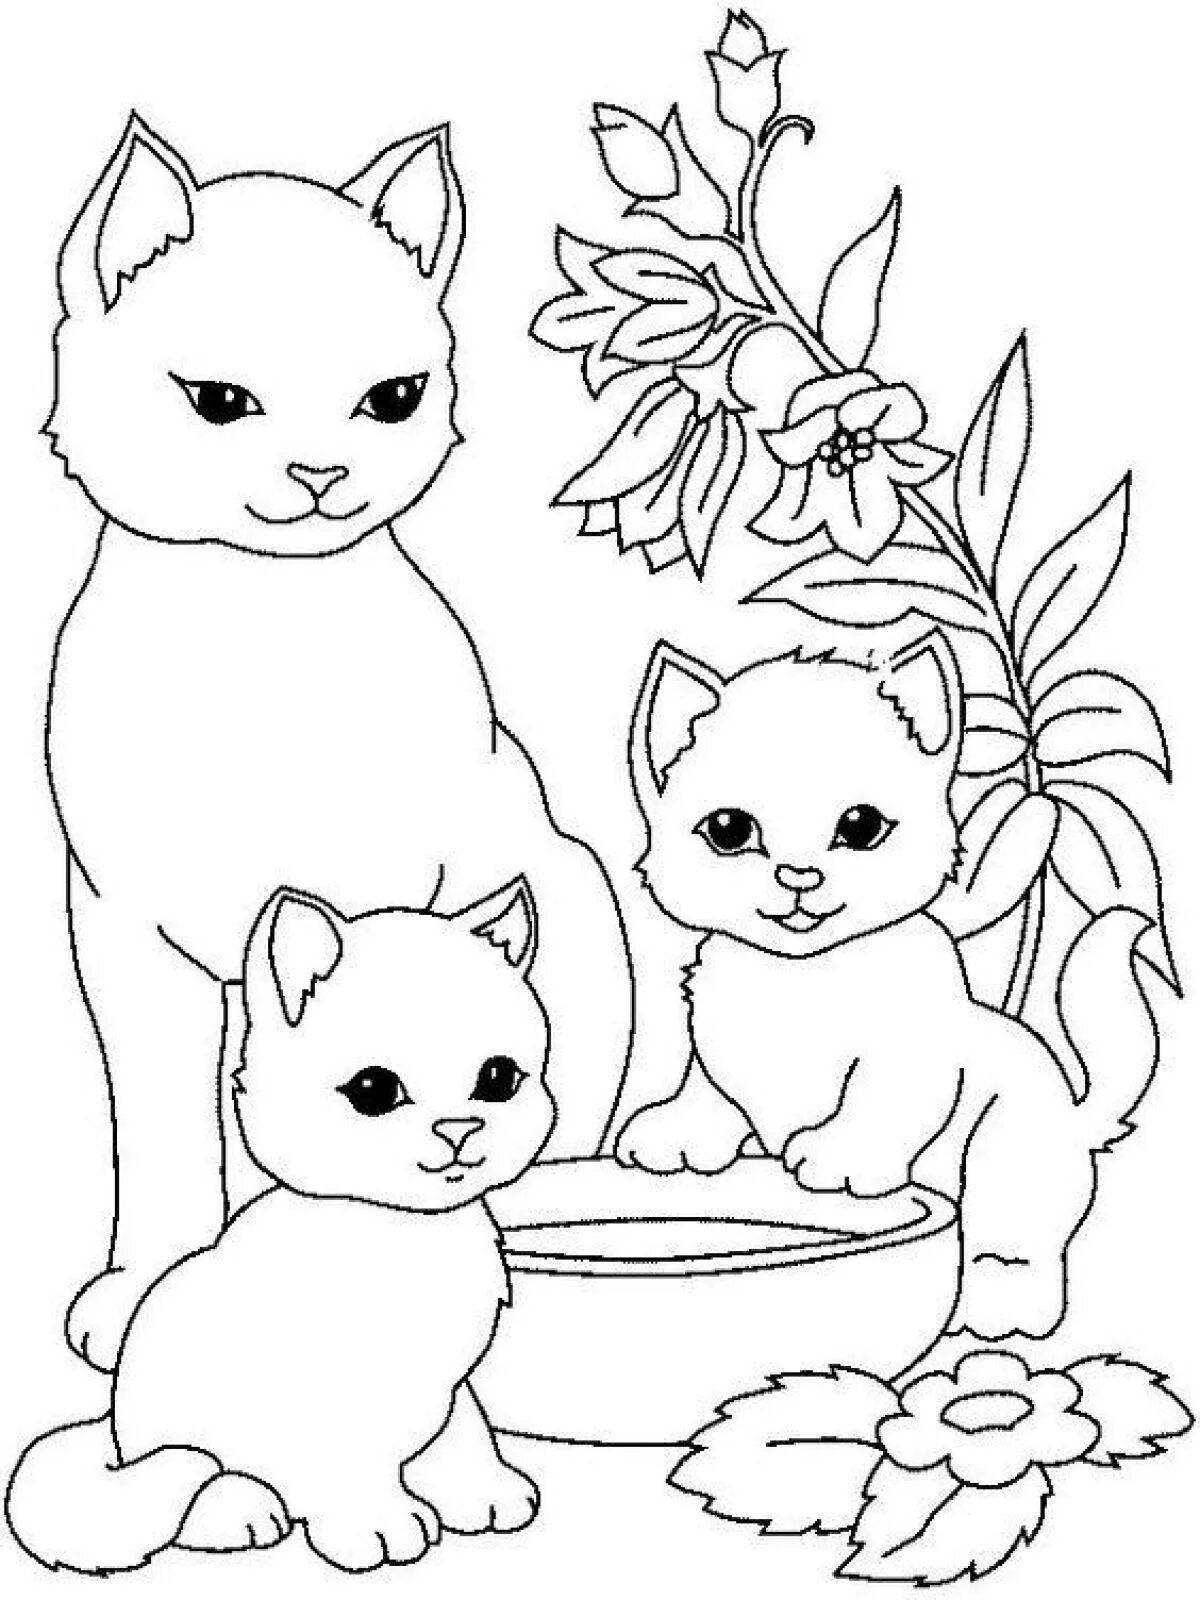 Coloring playful cat for kids